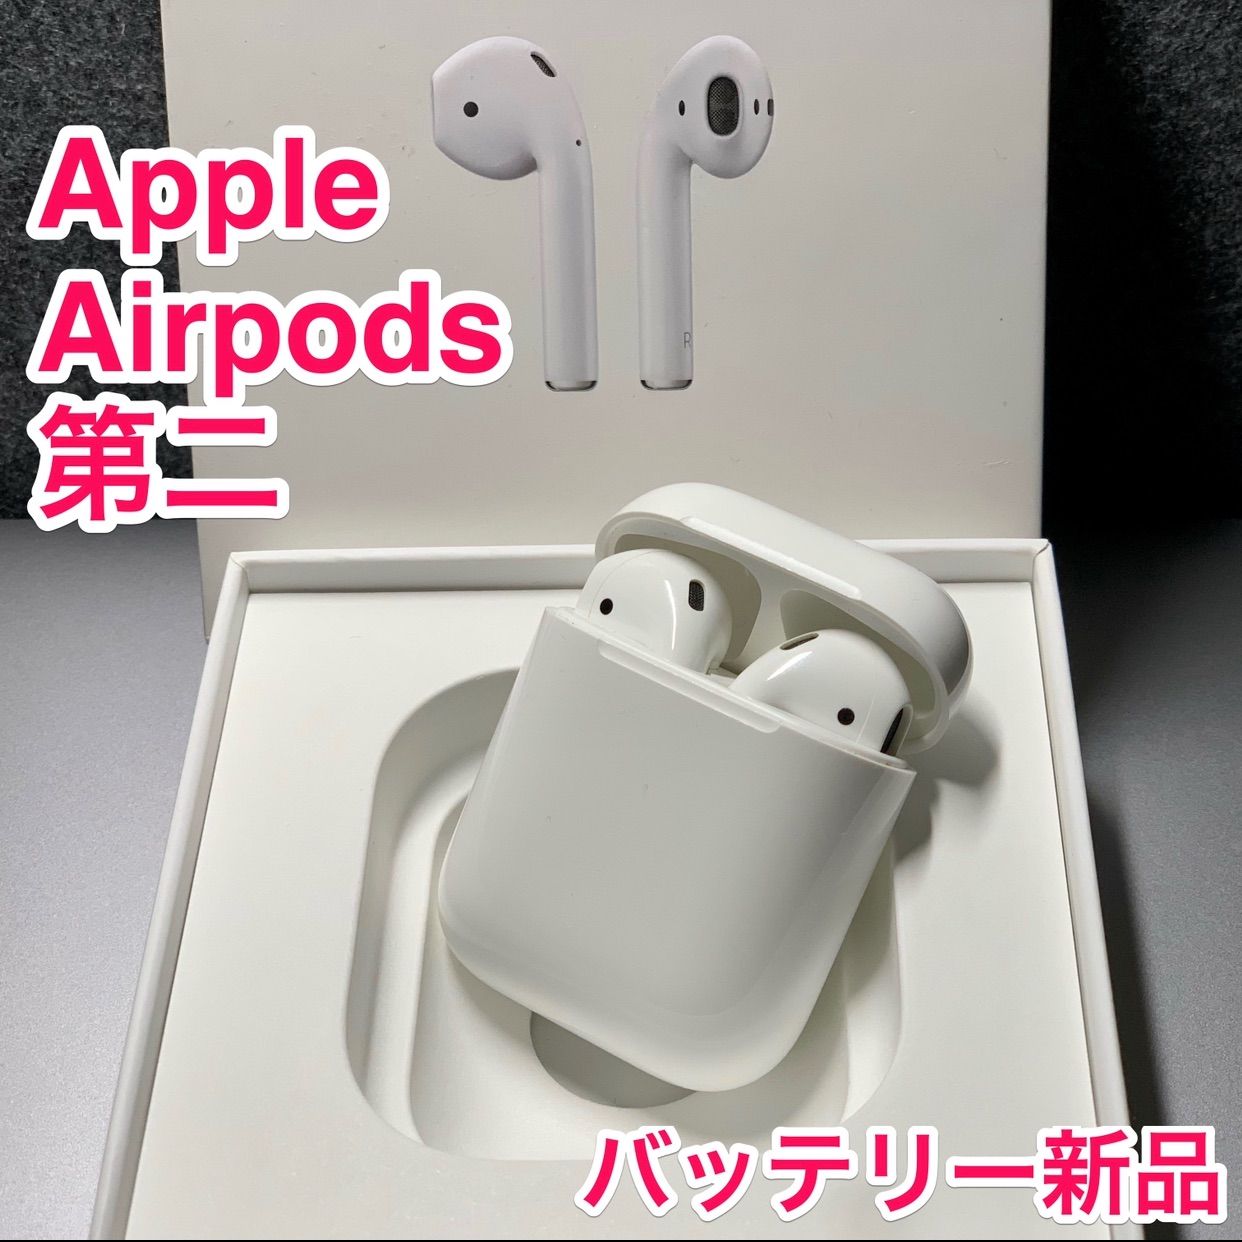 Apple AirPods 第二世代 バッテリー新品 / エアーポッズ バッテリー 